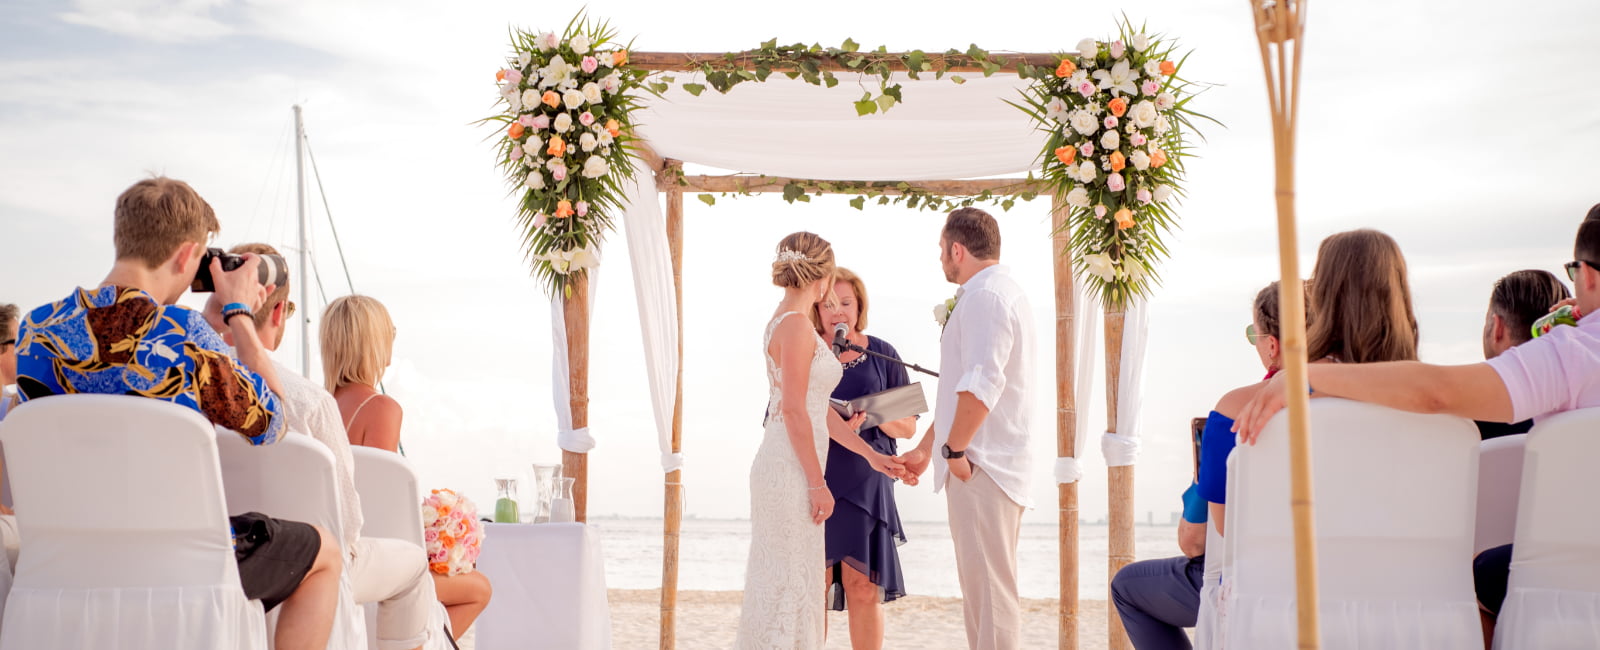 Ceremony held with altar on the beach